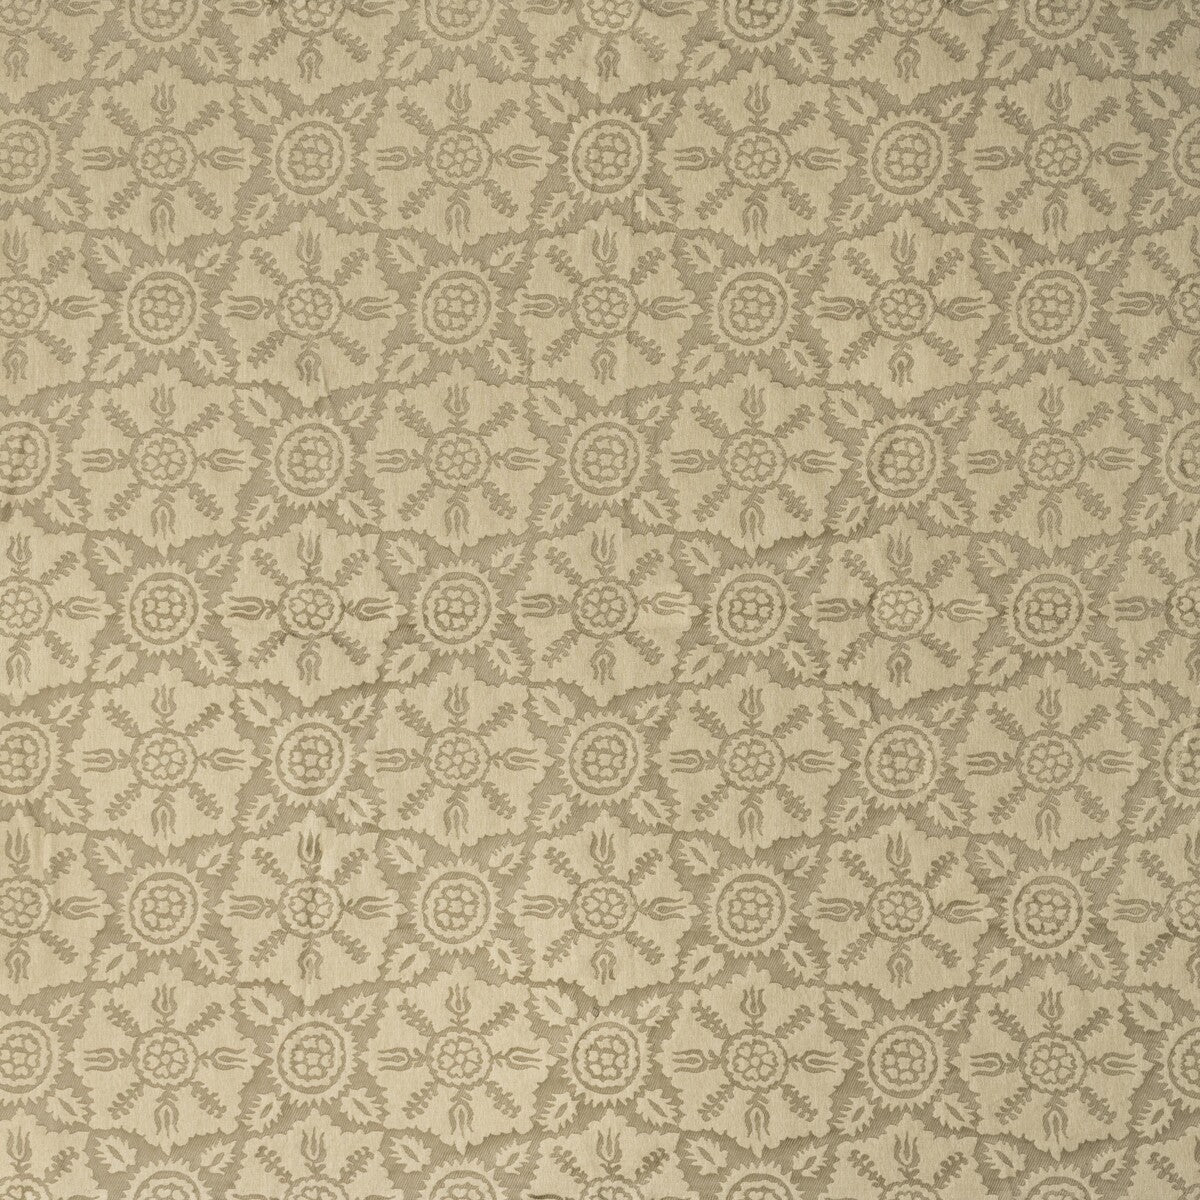 Ormond fabric in sand color - pattern BFC-3679.116.0 - by Lee Jofa in the Blithfield collection